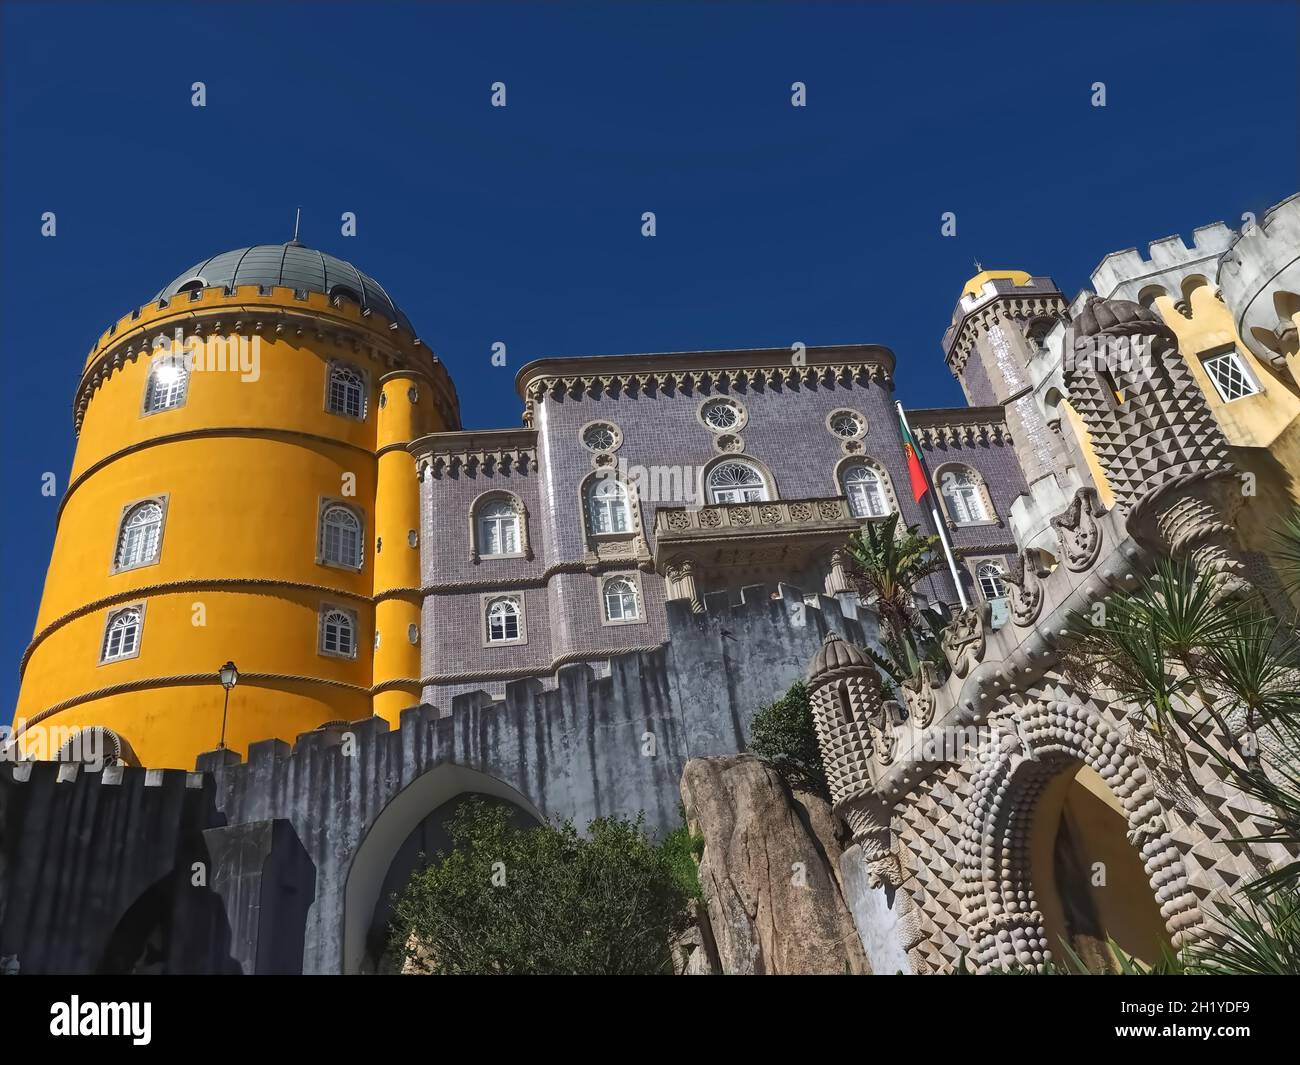 https://c8.alamy.com/comp/2H1YDF9/colorful-pena-palace-in-sintra-in-portugal-2H1YDF9.jpg